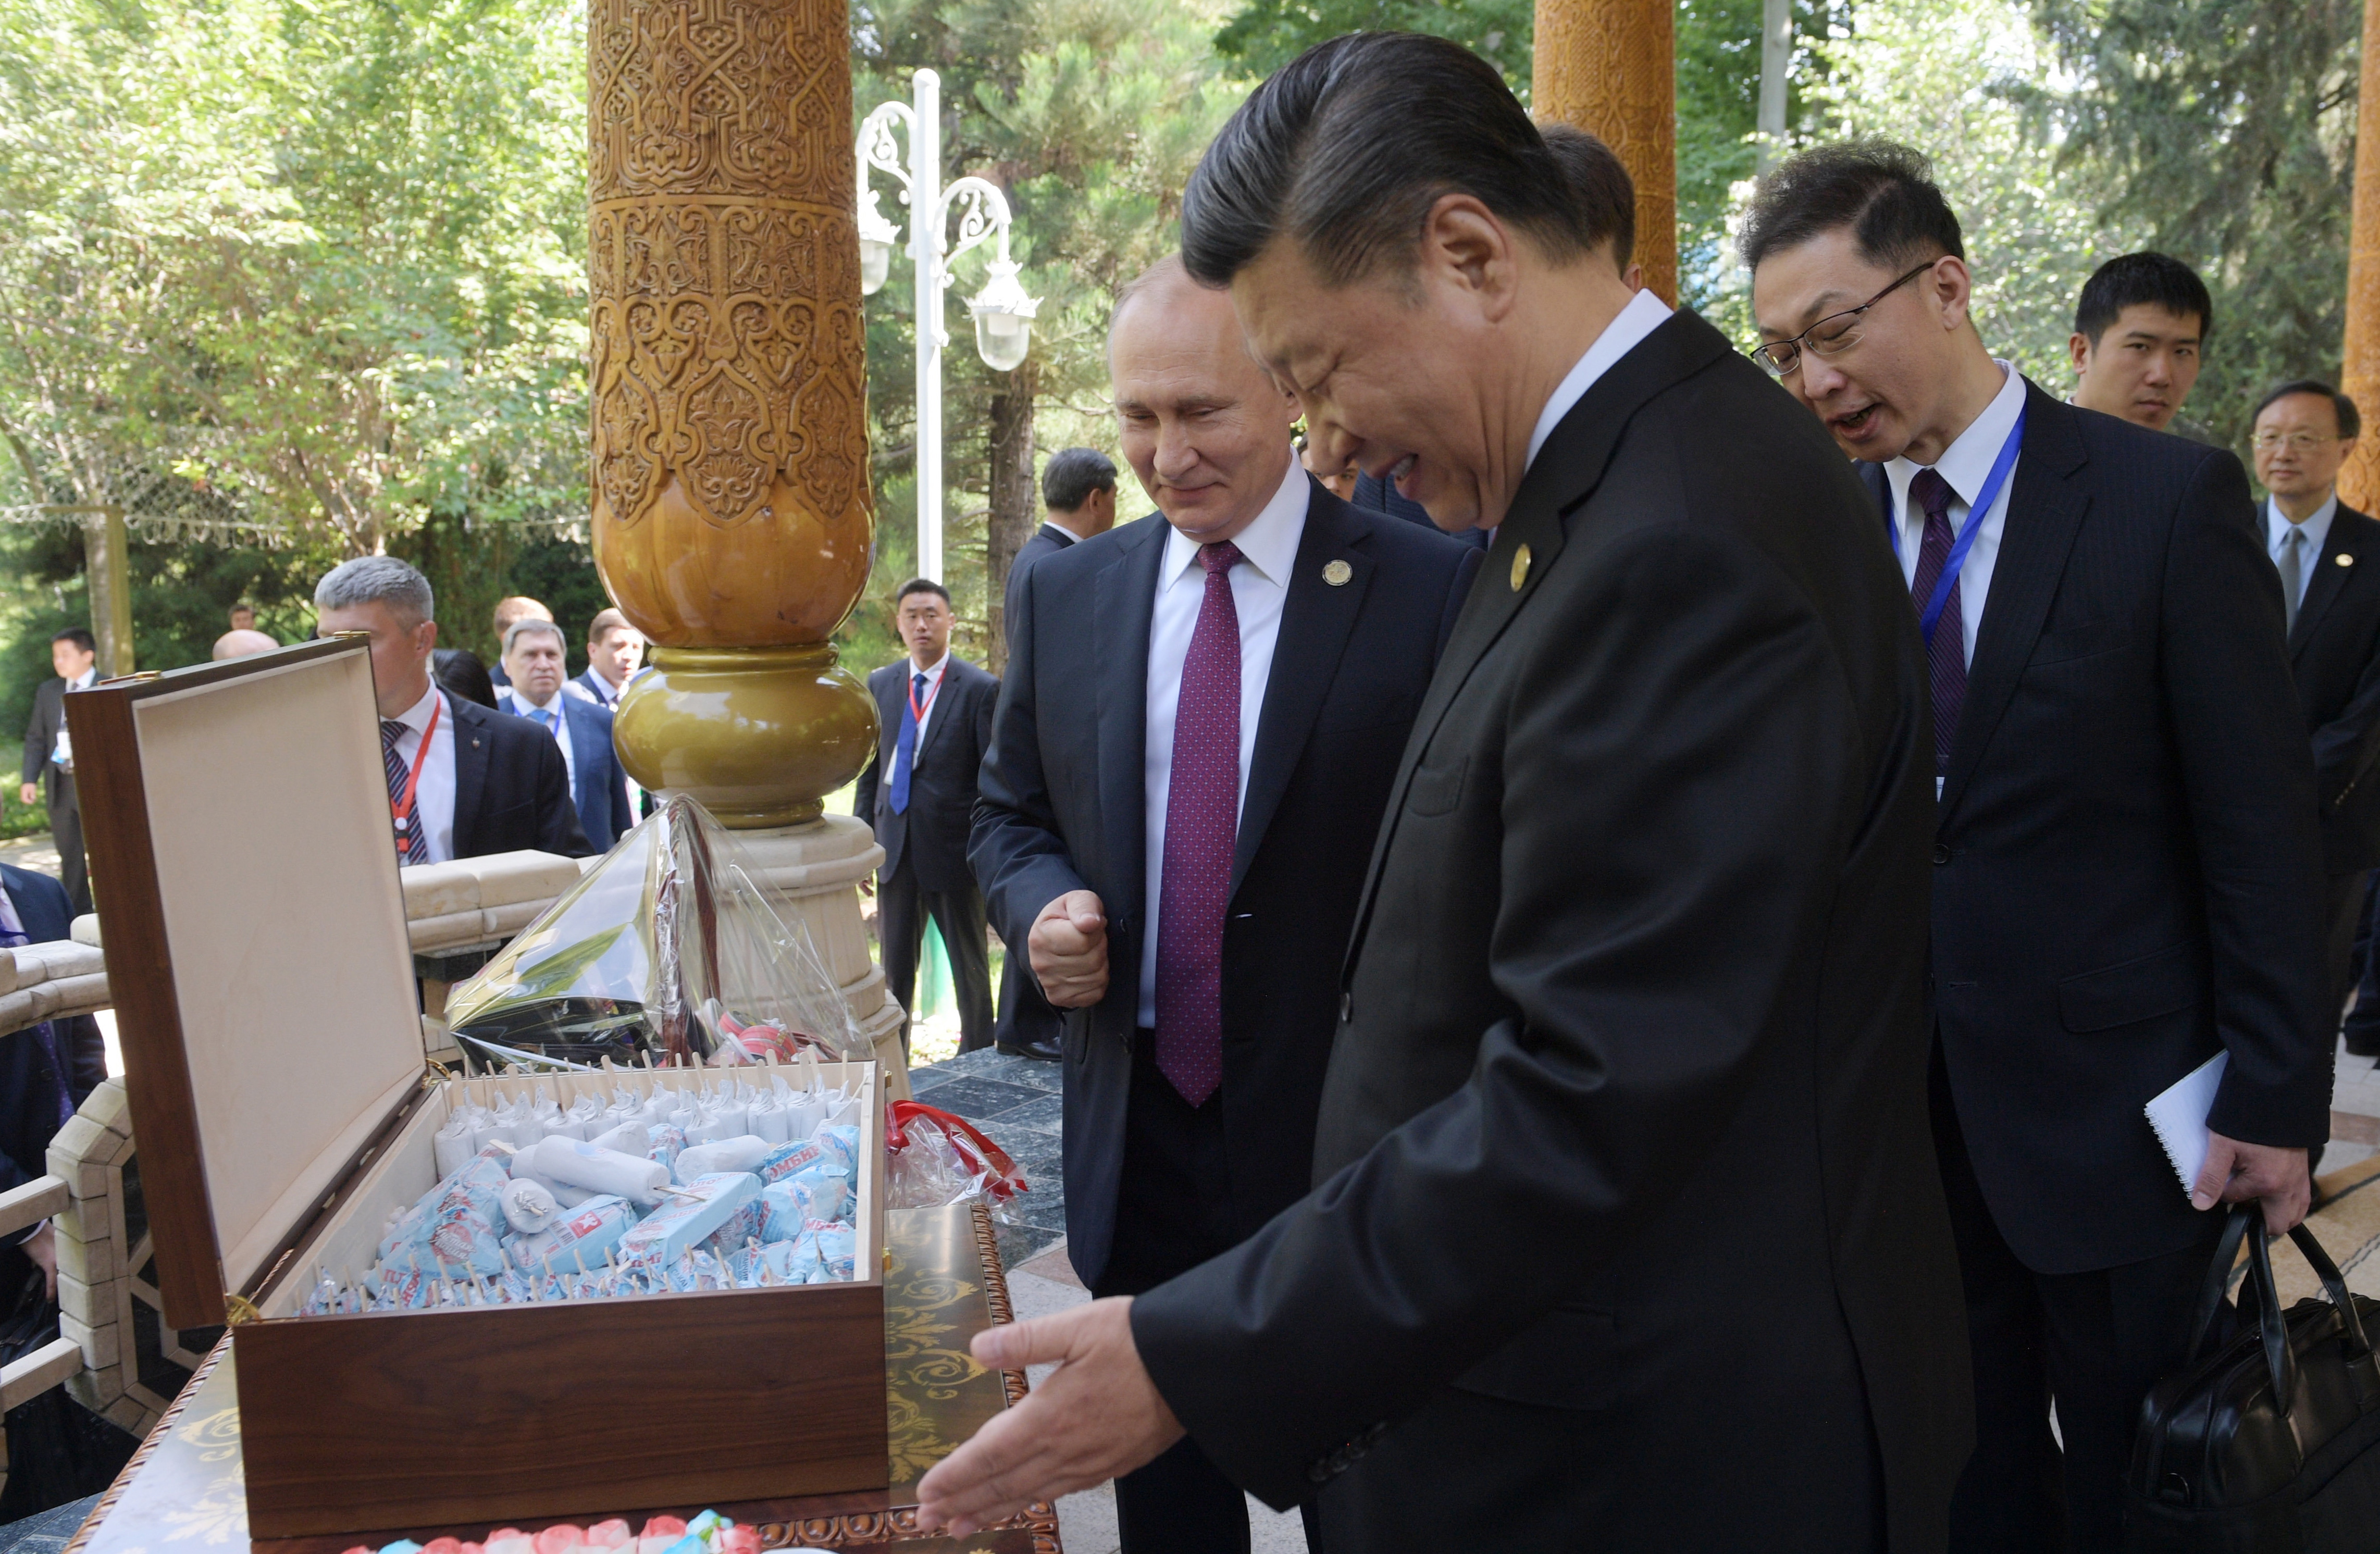 epa07649469 Russian President Vladimir Putin (L) and Chinese President Xi Jinping (C) during their meeting before the start of the fifth summit of the Conference on Interaction and Confidence Building Measures in Asia (CICA) in Dushanbe, Tajikistan, 14 June 2019 (issued 15 June 2019).  EPA/ALEXEI DRUZHININ / SPUTNIK / KREMLIN POOL PICTURE MADE AVAILABLE TODAY